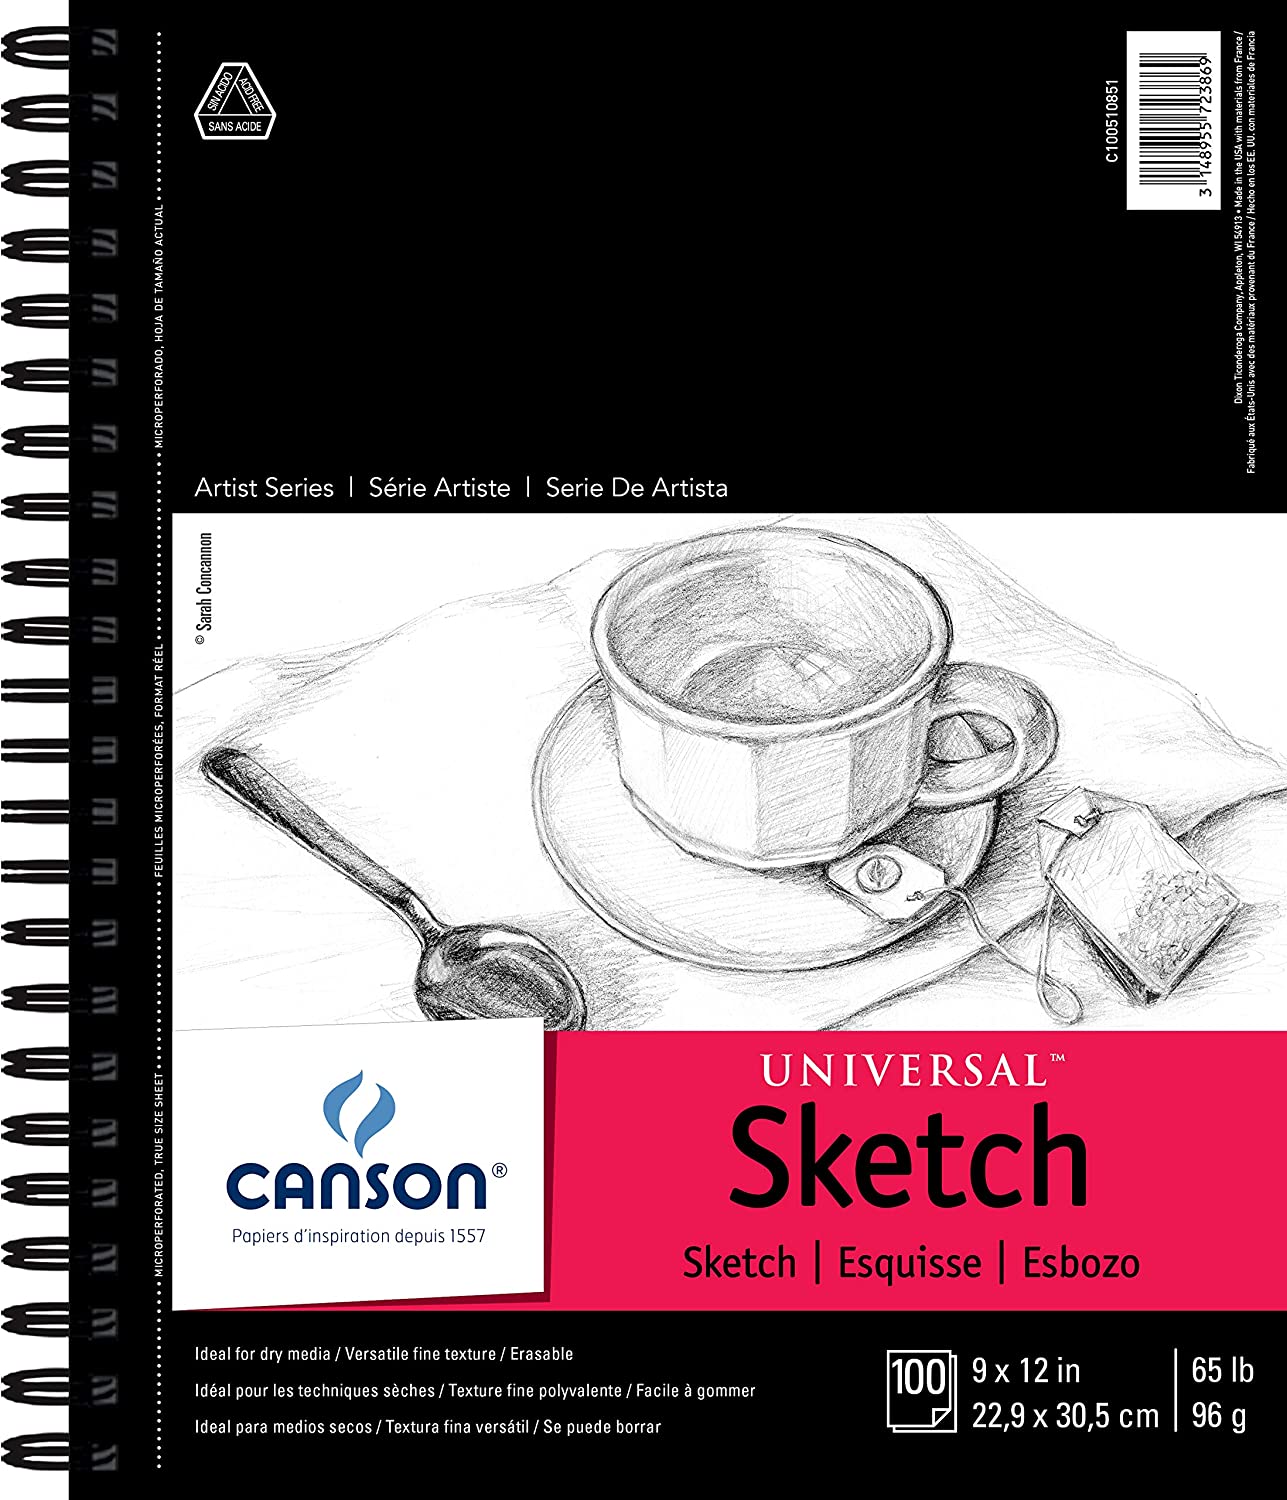 Illo Sketchbook 8”x8” Review  Illustrations, Sketches, and Art